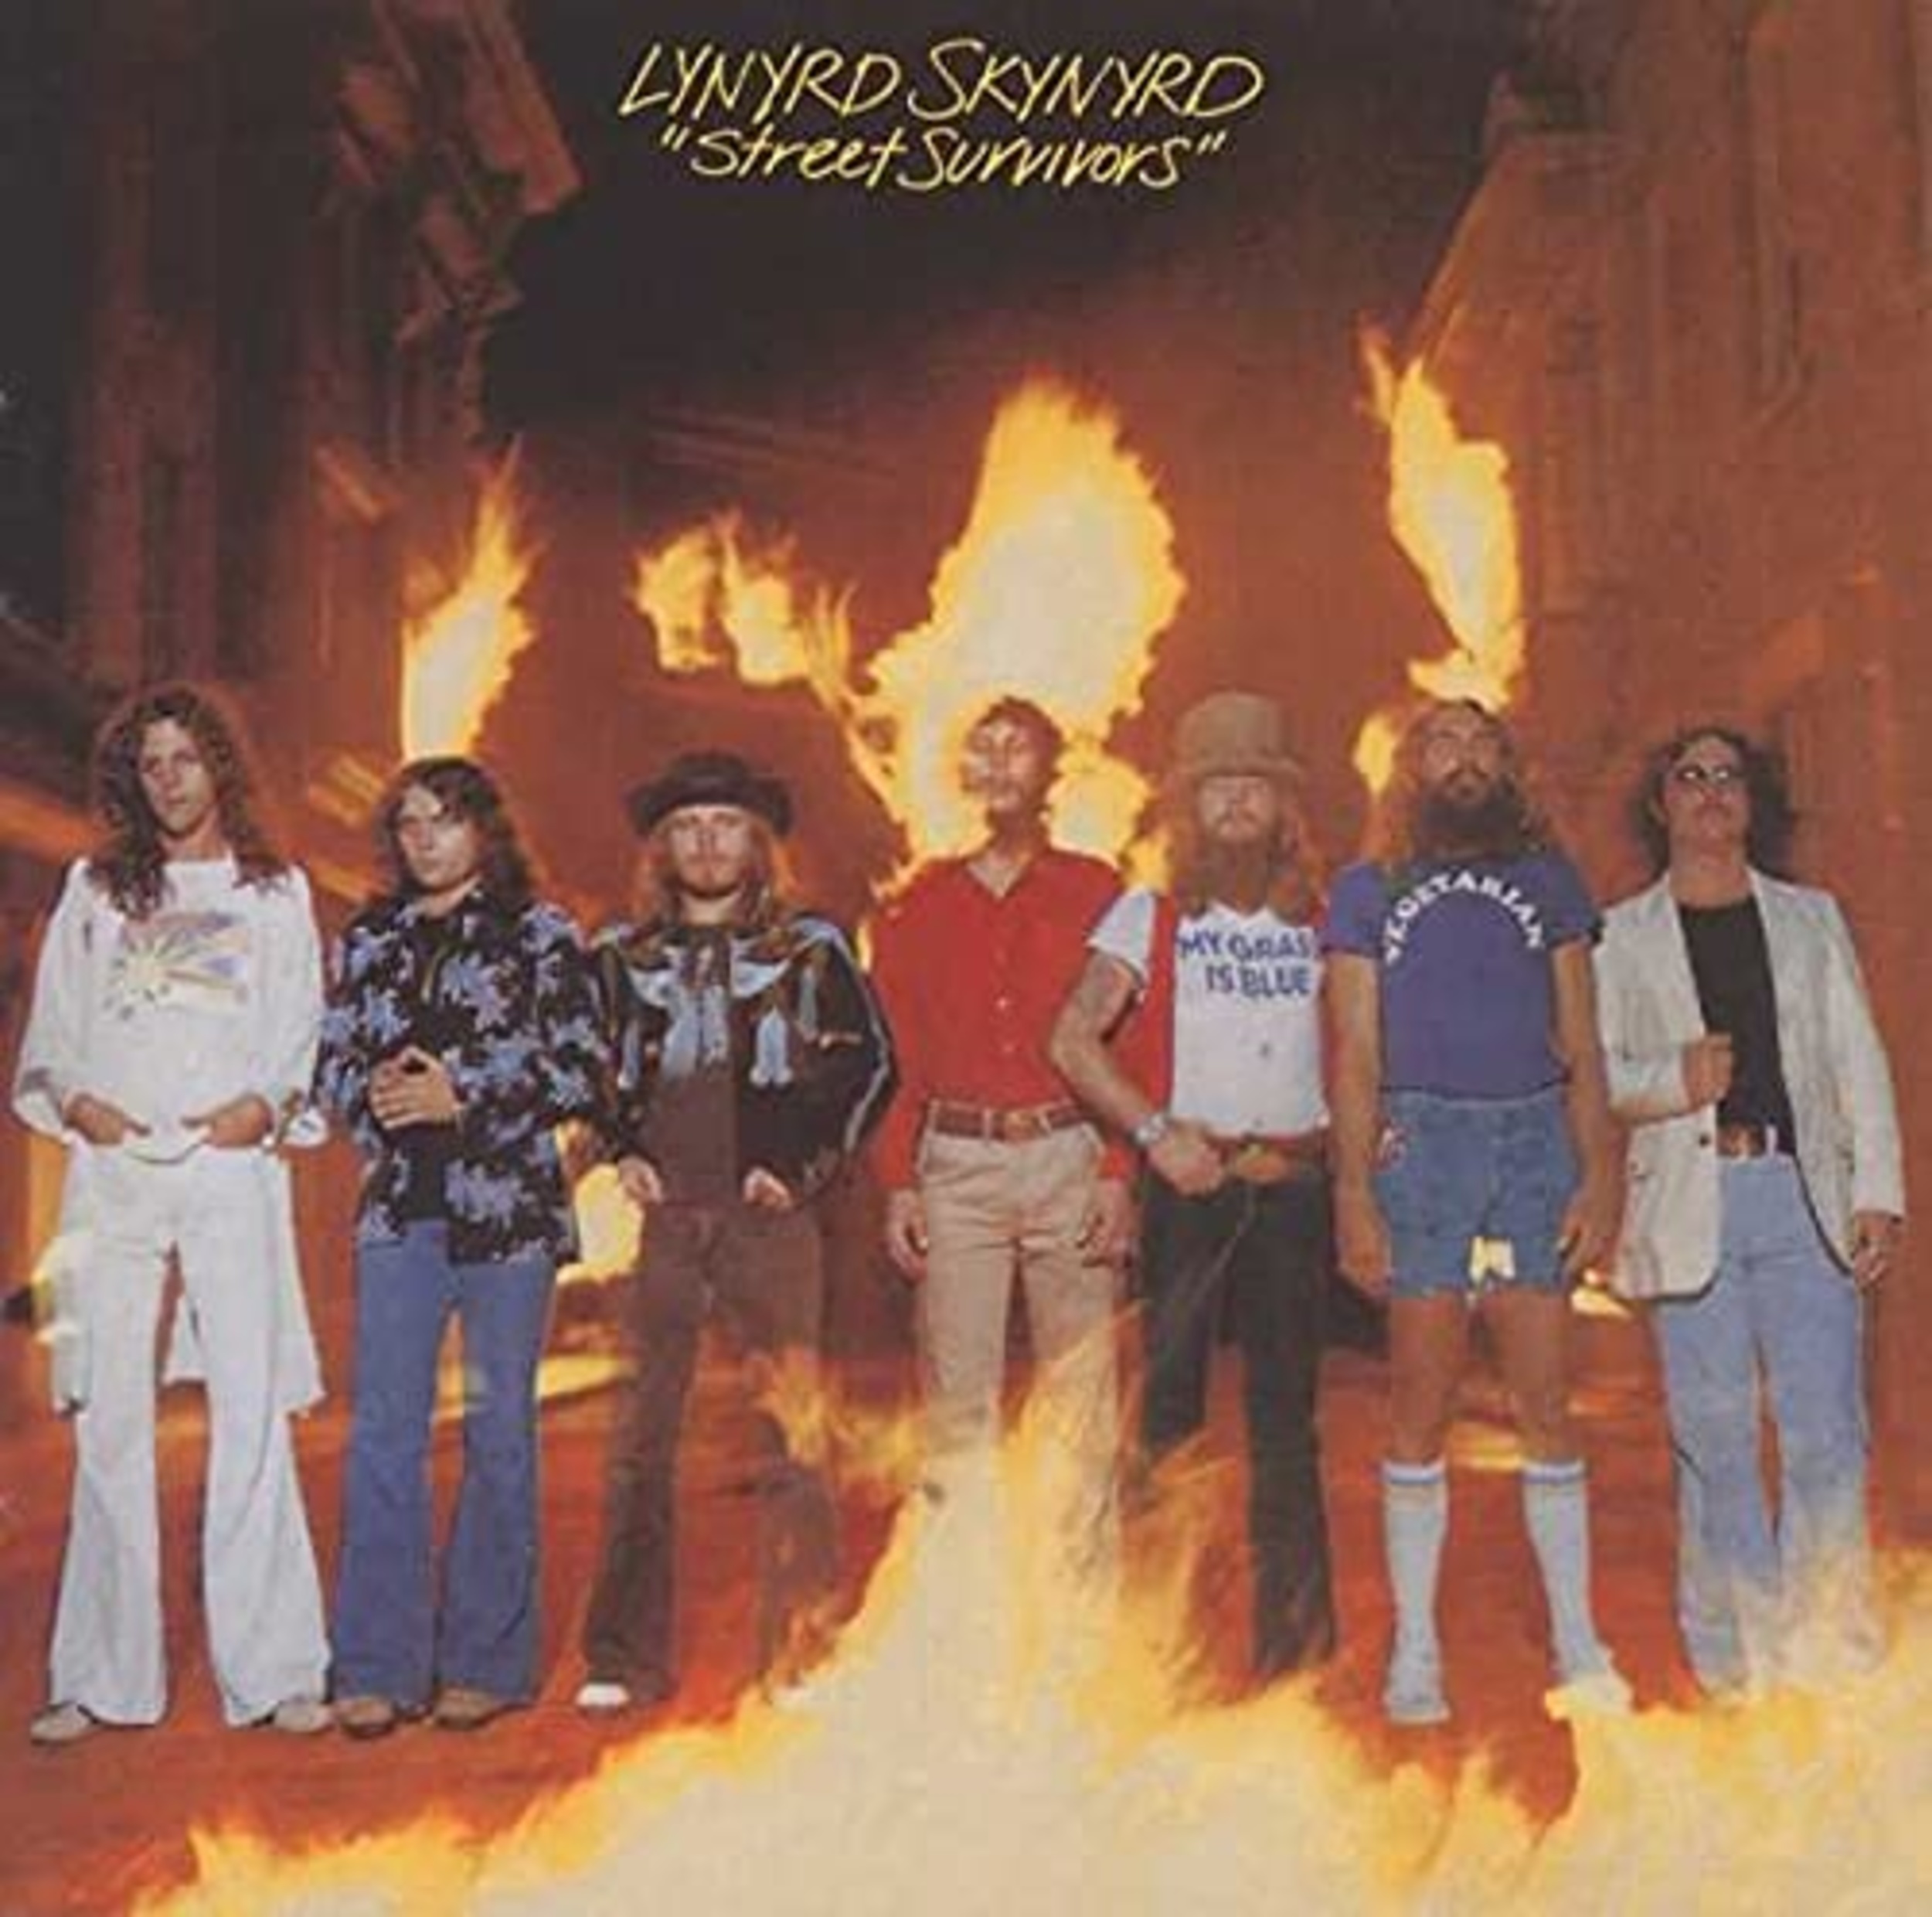 <p>The aforementioned "I Know a Little" might be Steve Gaines' individual shining moment within Lynyrd Skynyrd, but his work with Ronnie Van Zant on this <em>Street </em><em>Survivors</em>' <a href="https://www.youtube.com/watch?v=L1t6fNnLOfo">classic </a>is a special part of the band's legacy. Gaines not only co-wrote the song and stars on guitar, but also trades lead vocals with Van Zant on this upbeat number about those who just can't sit back or stand still and watch life go by. </p><p><a href='https://www.msn.com/en-us/community/channel/vid-cj9pqbr0vn9in2b6ddcd8sfgpfq6x6utp44fssrv6mc2gtybw0us'>Follow us on MSN to see more of our exclusive entertainment content.</a></p>